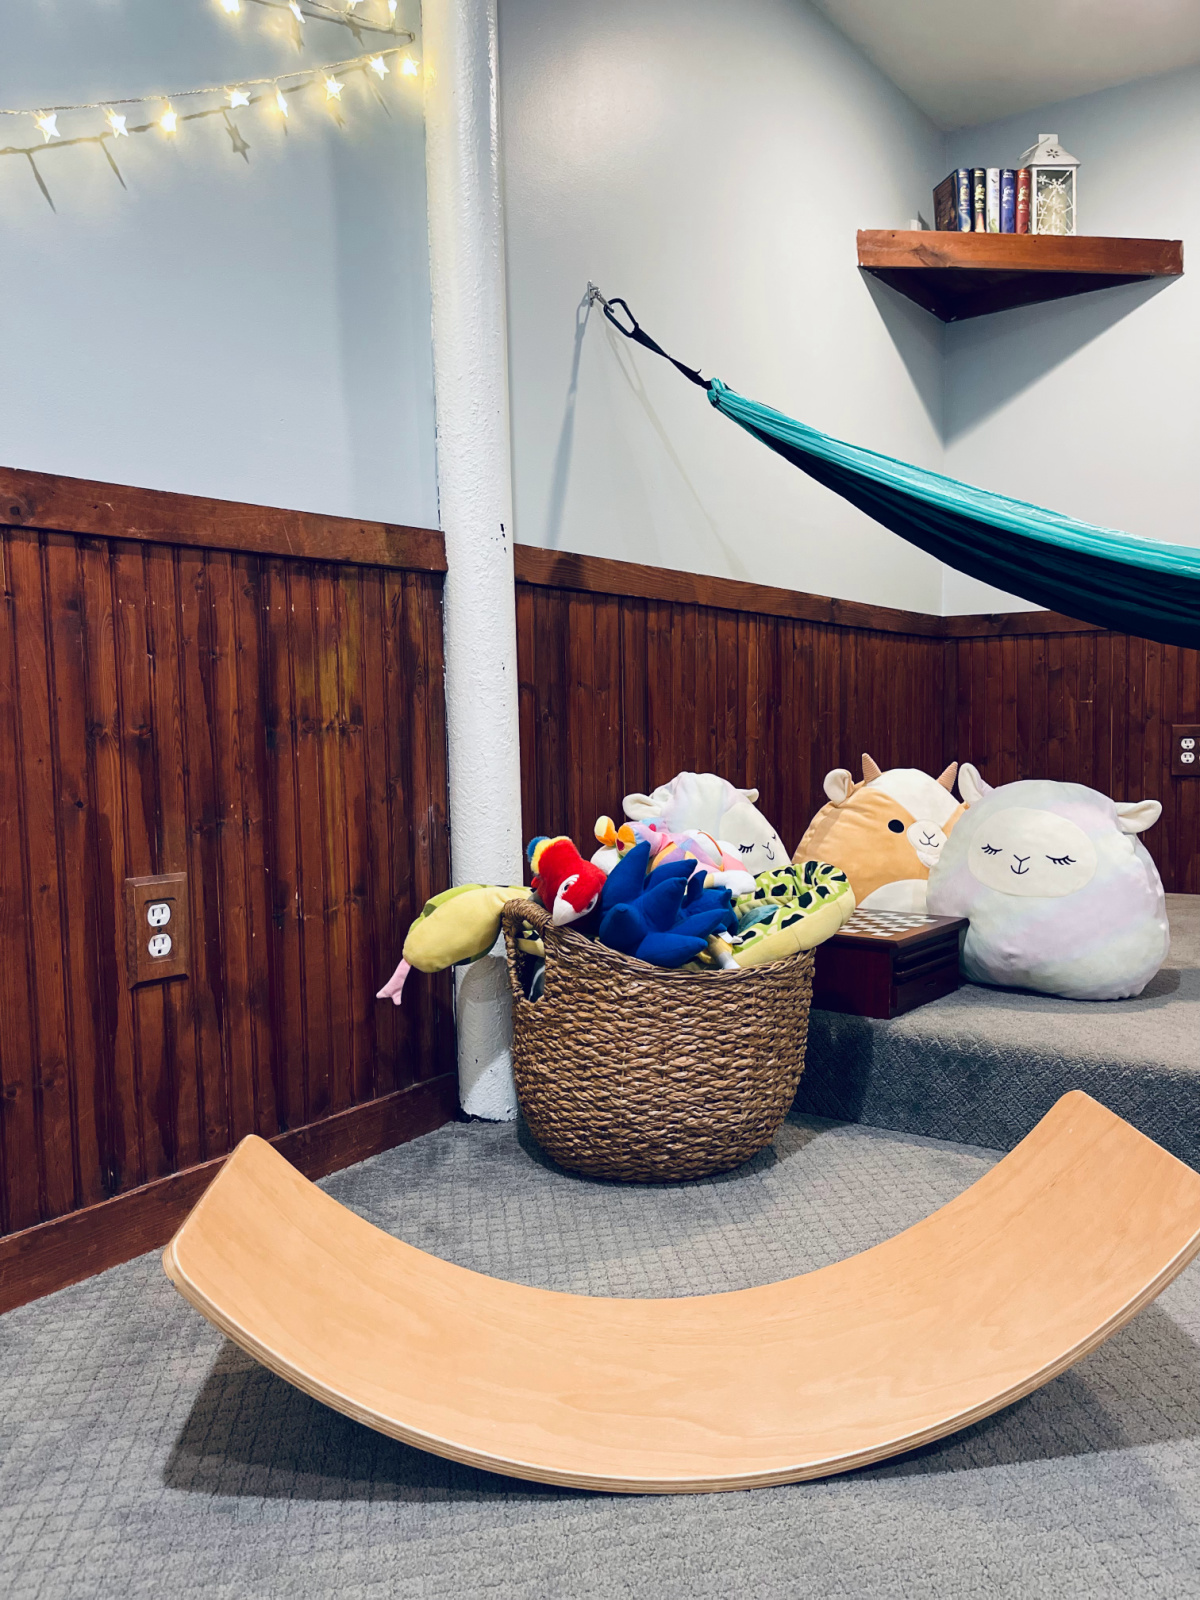 balance board in minimalist playroom, with stuffed animal basket and squishmallows nearby.